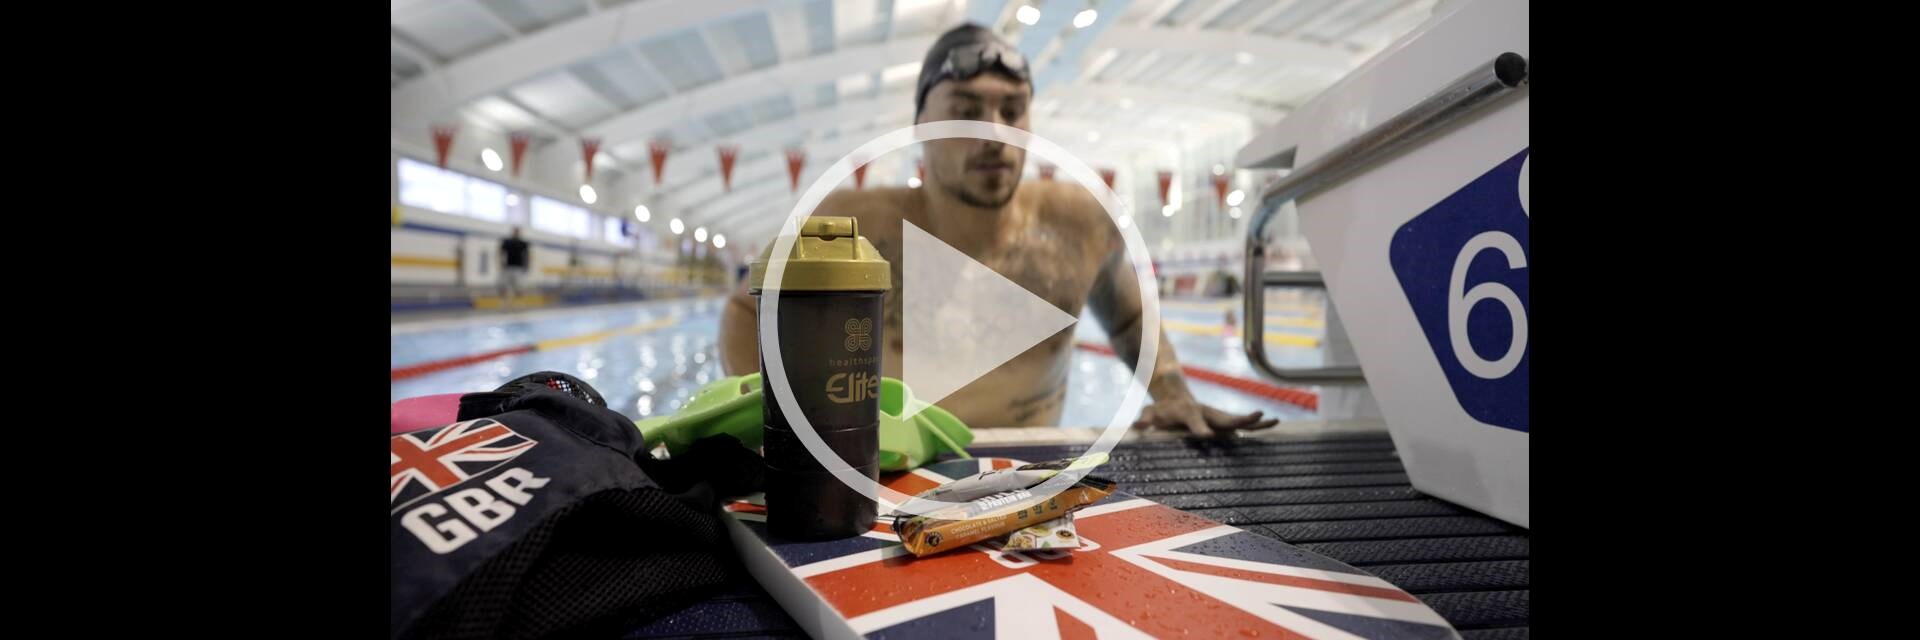 British Swimming athlete getting out of the pool next to Healthspan Elite products